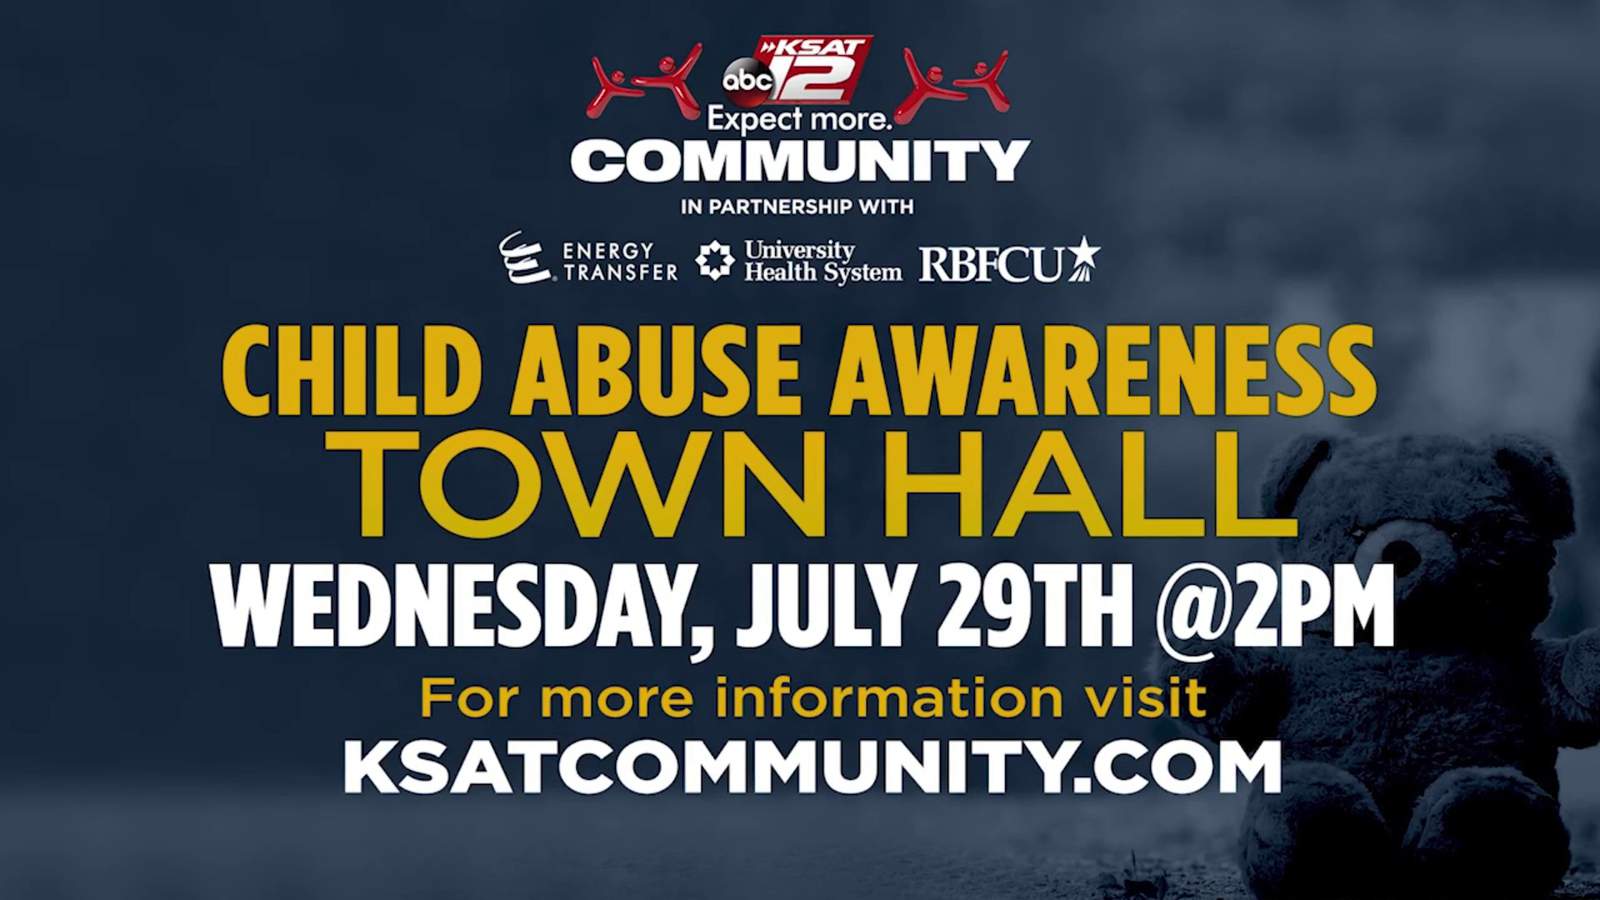 KSAT Community to hold Child Abuse Awareness Town Hall